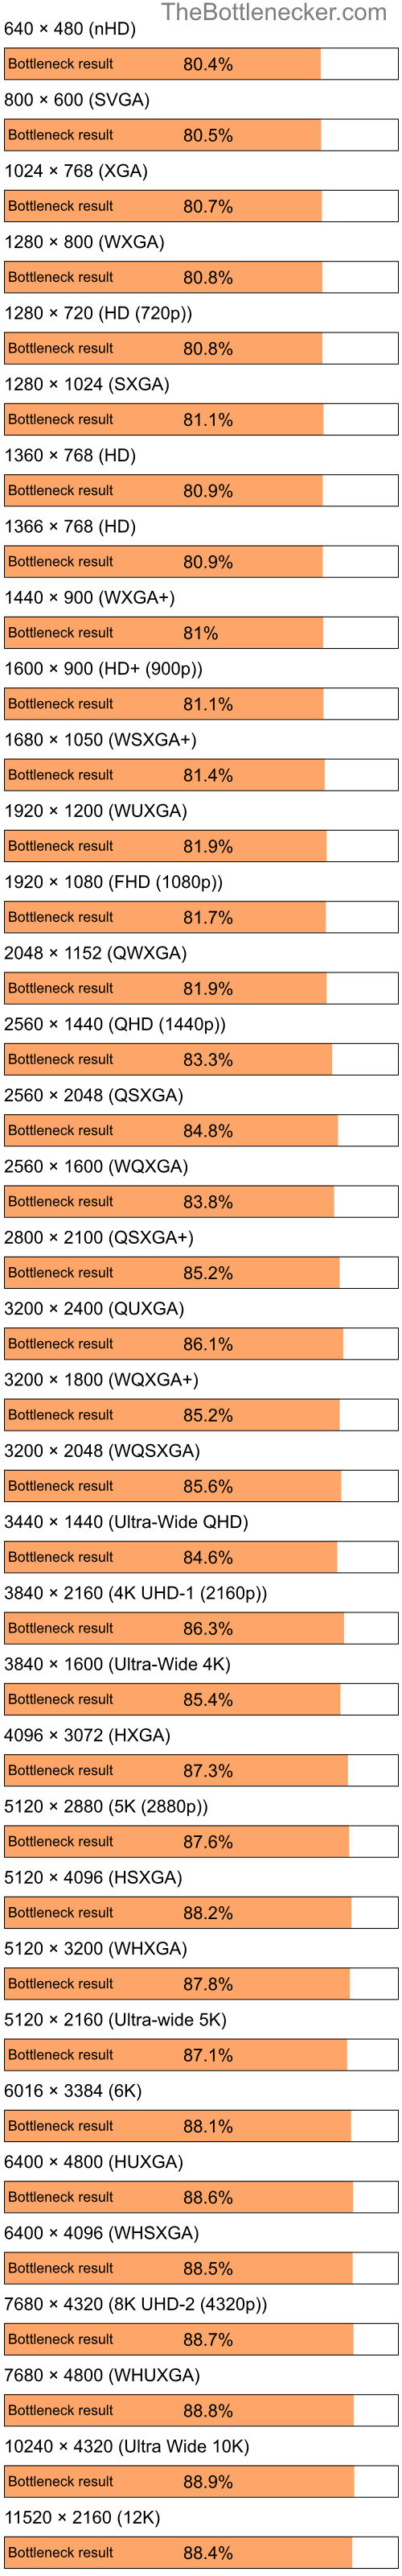 Bottleneck results by resolution for Intel Celeron M 420 and AMD Mobility Radeon X1350 in Graphic Card Intense Tasks